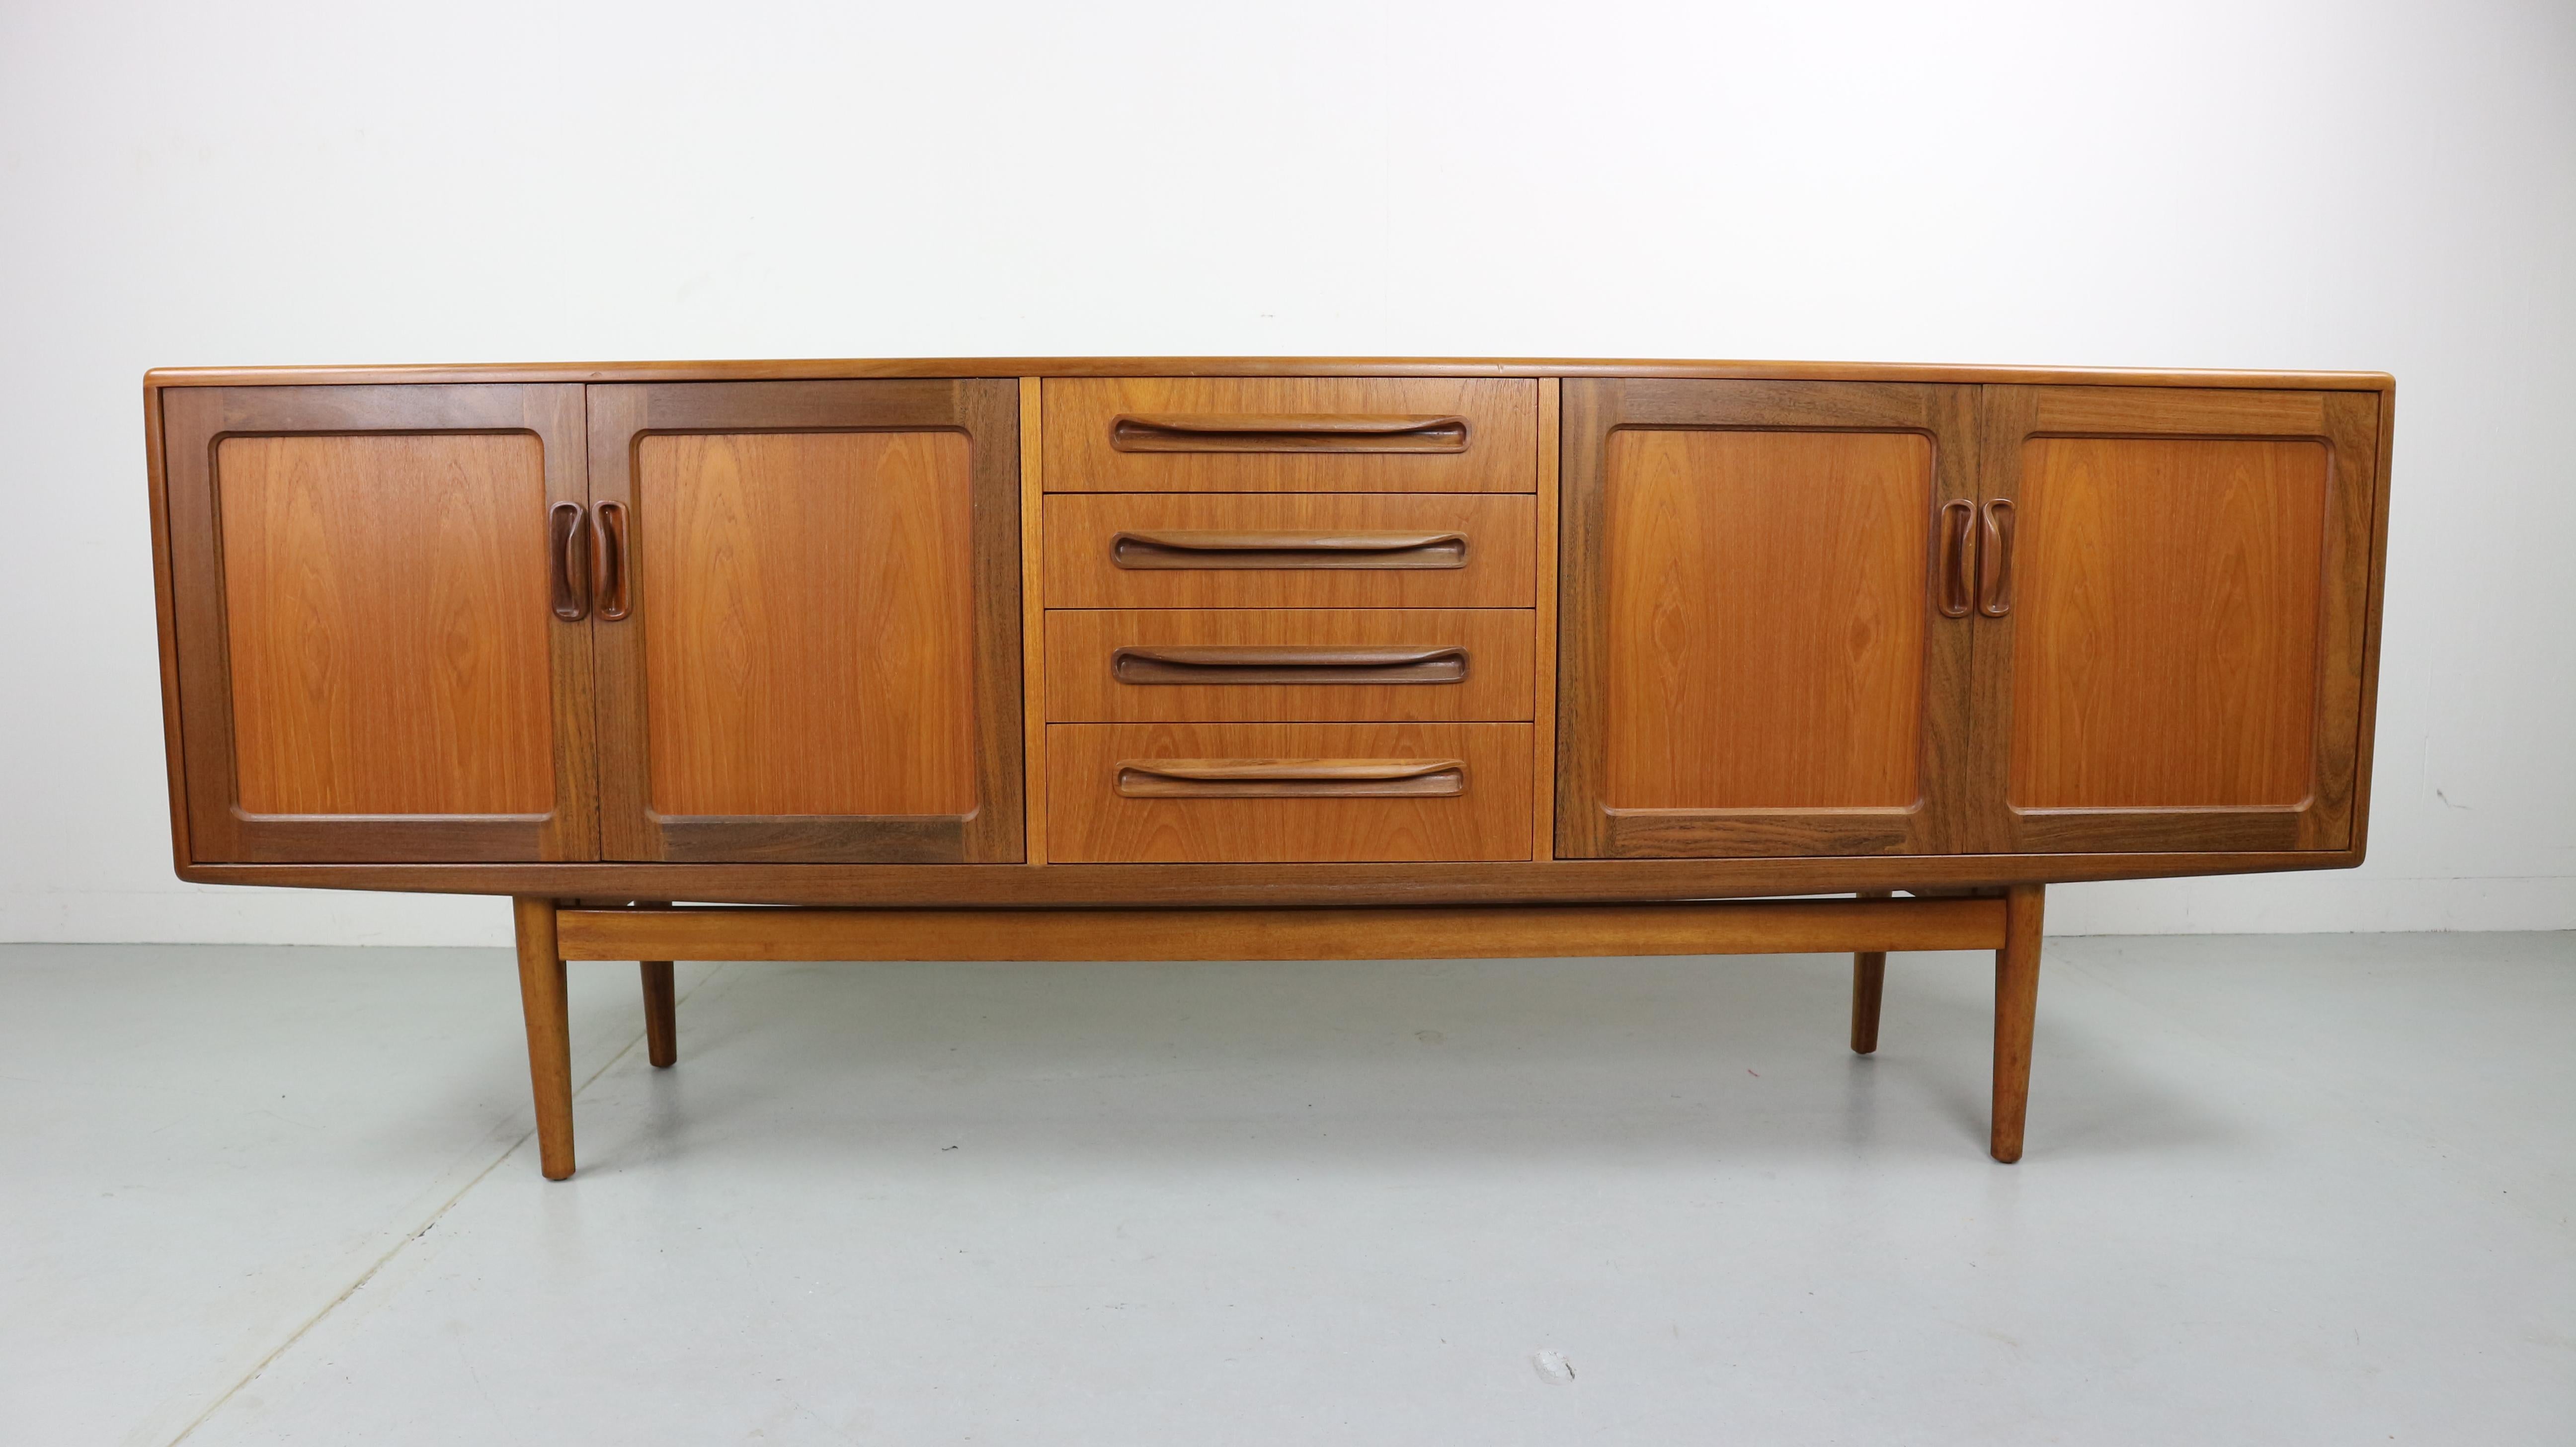 Offering a stunning and expertly refinished teak long sideboard credenza by Victor Wilkins for G-Plan.

Set on organic teak legs, the unit floats effortlessly and due to it's size and such as a TV & Media centre, a storage unit, drinks cabinet,